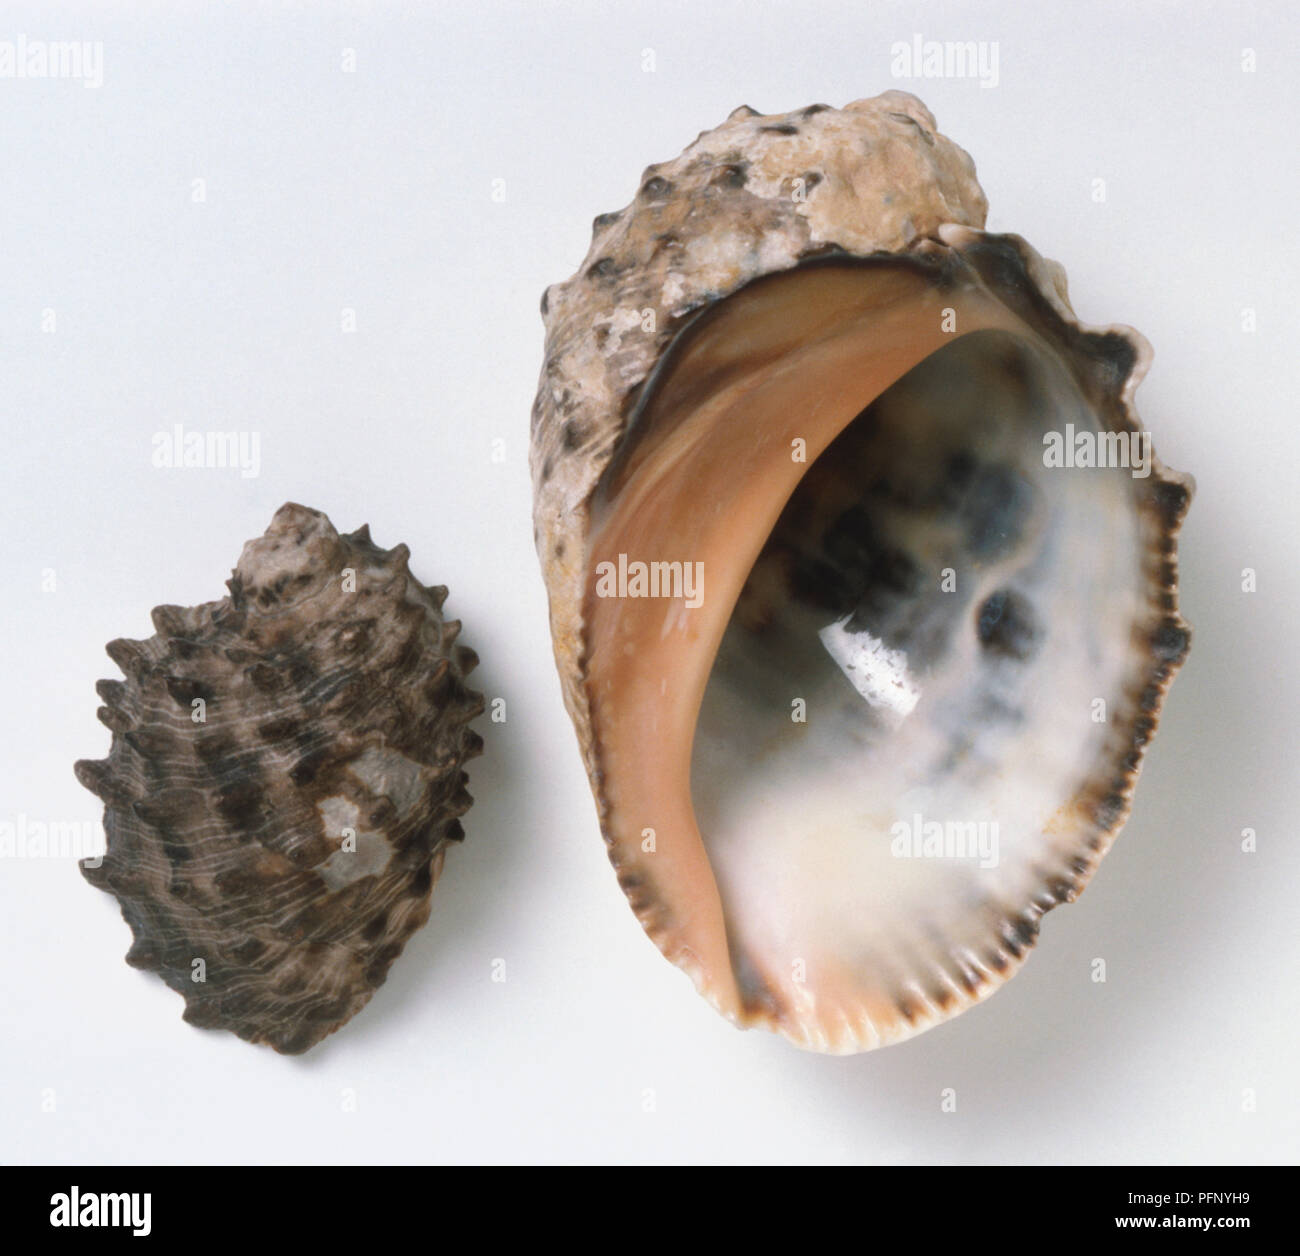 Purpura patula, Wide Mouthed Purpura Shell, above view of two shells, one top view with rough dark grey nobbly surface, the other underside view of the glossy shiny interior of the shell with pink and cream colours. Stock Photo